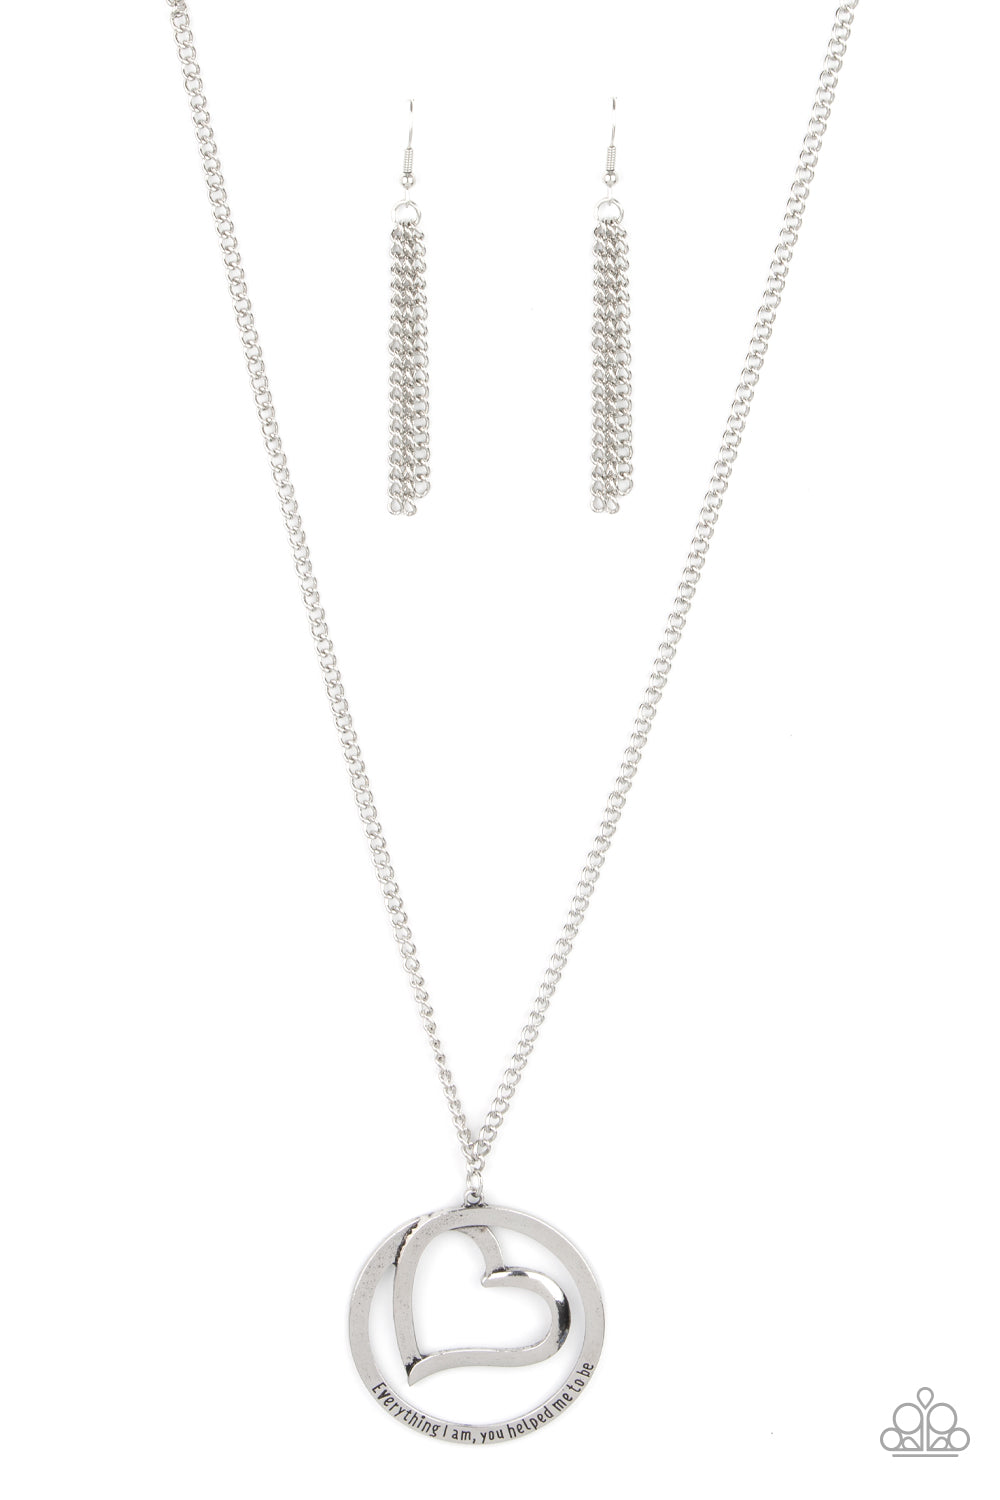 Positively Perfect - Silver (Heart) Necklace